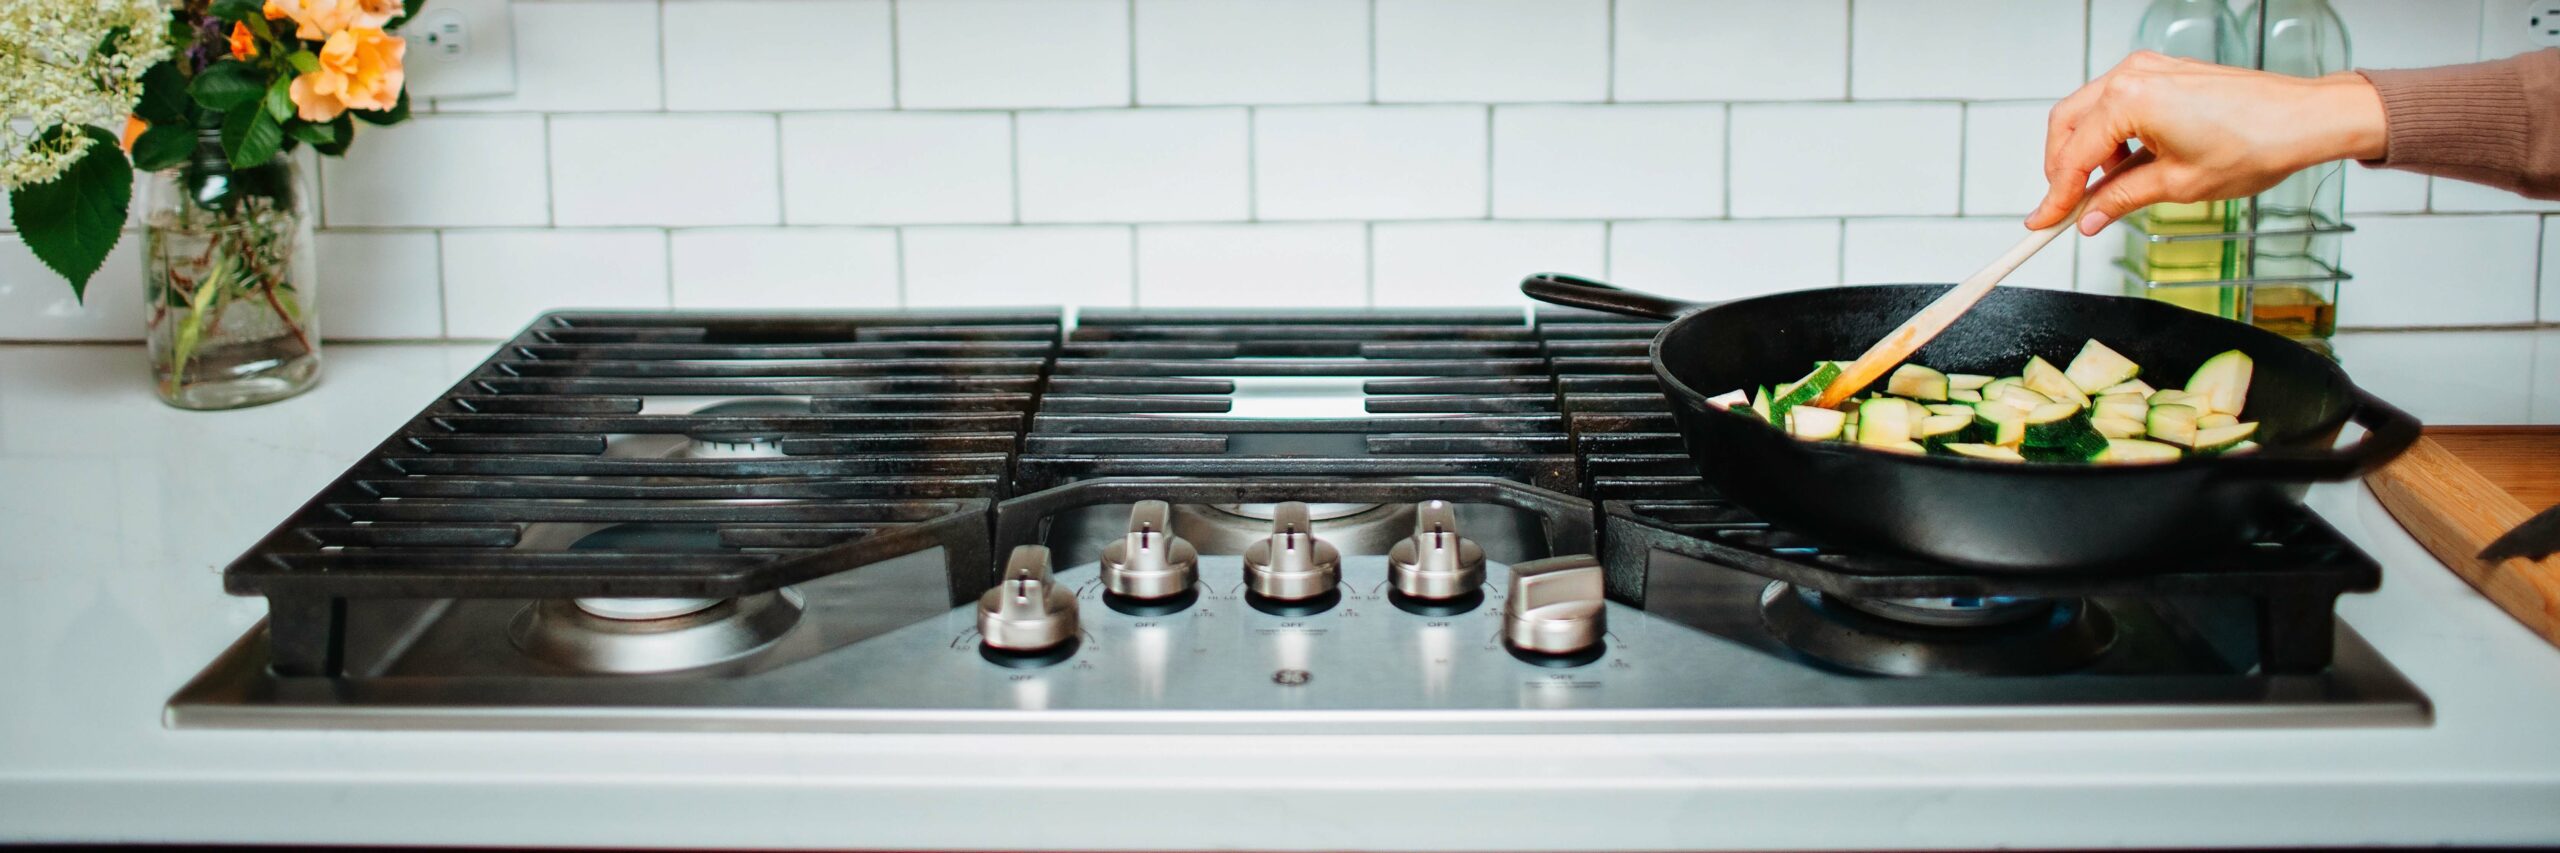 How to Pick the Right Pan: Best Cooking Equipment